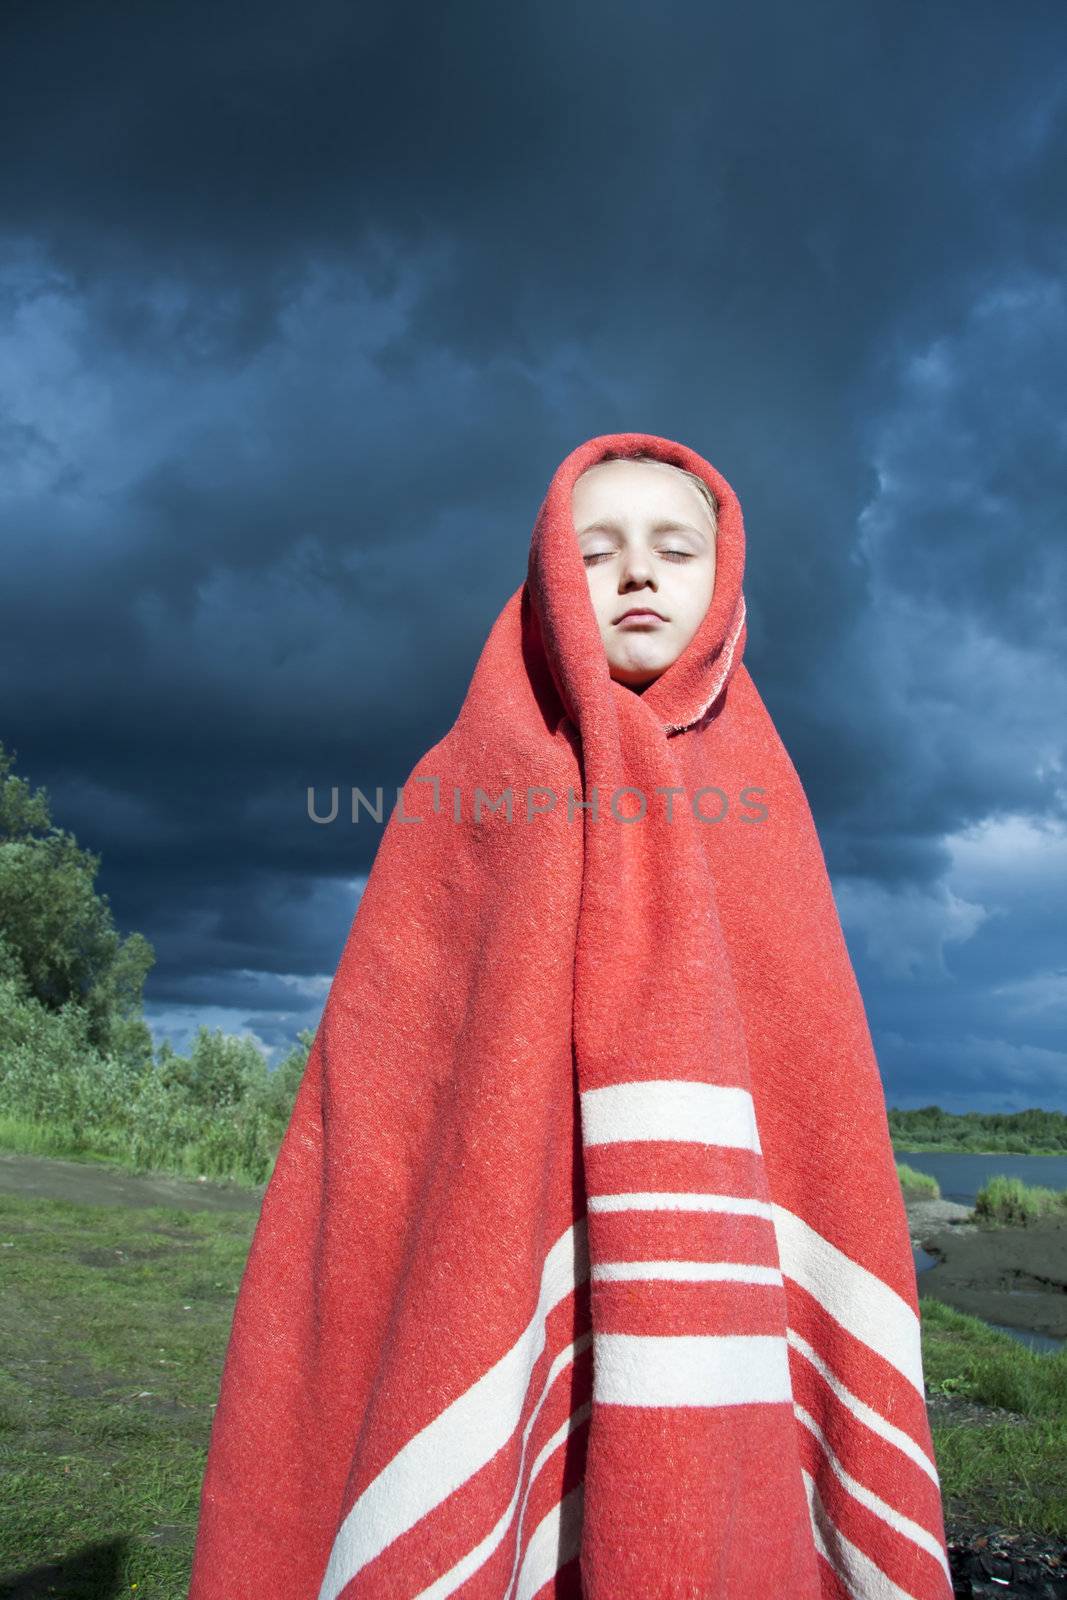 The girl wrapped in a red blanket by anelina